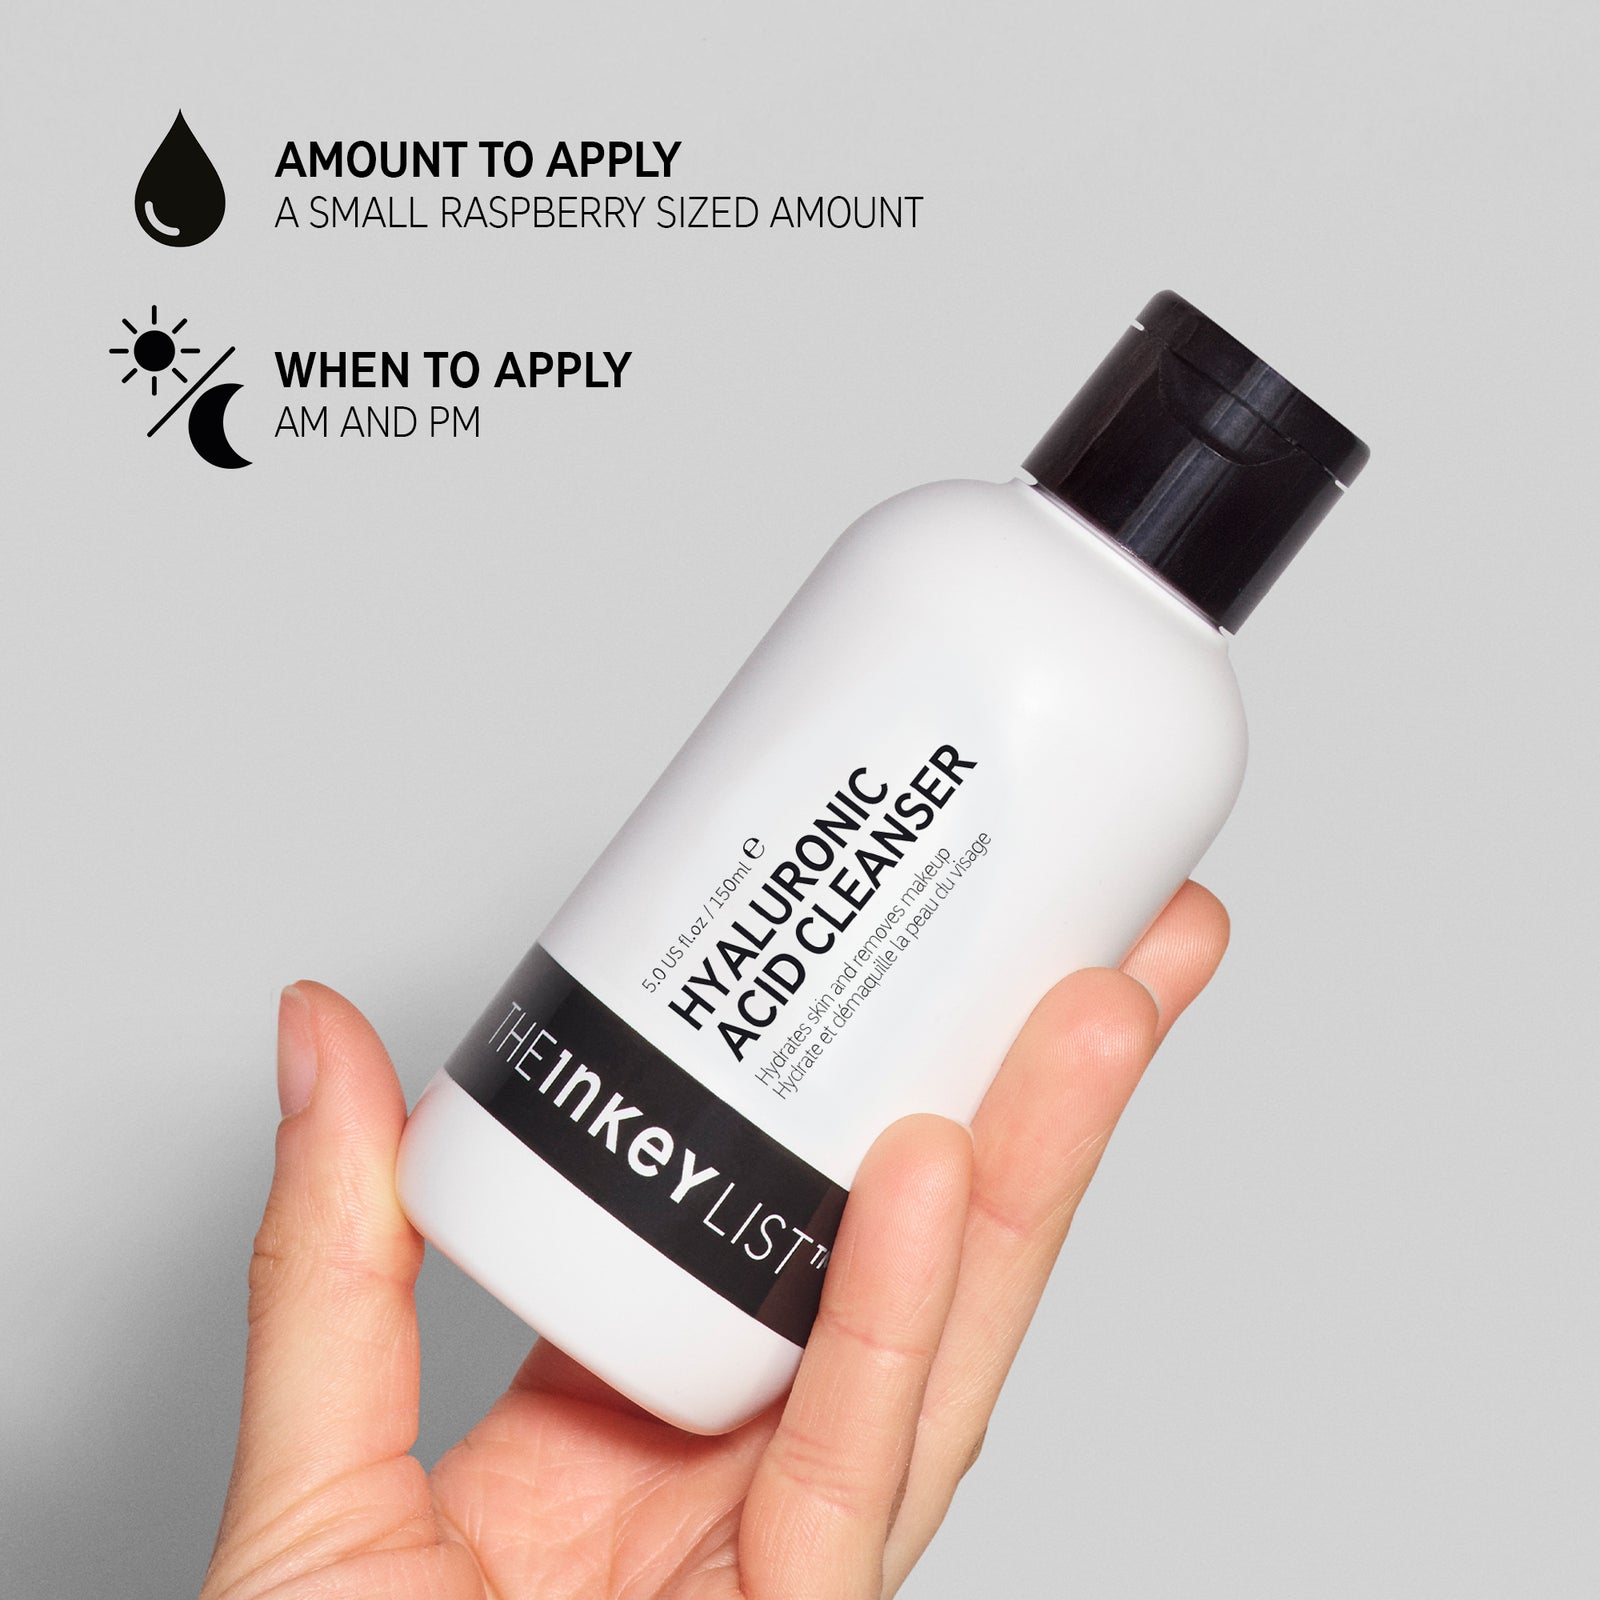 Hand holding Hyaluronic Acid Cleanser with black text explaining amount to apply (small raspberry sized amount)  and when to use it (AM and PM)